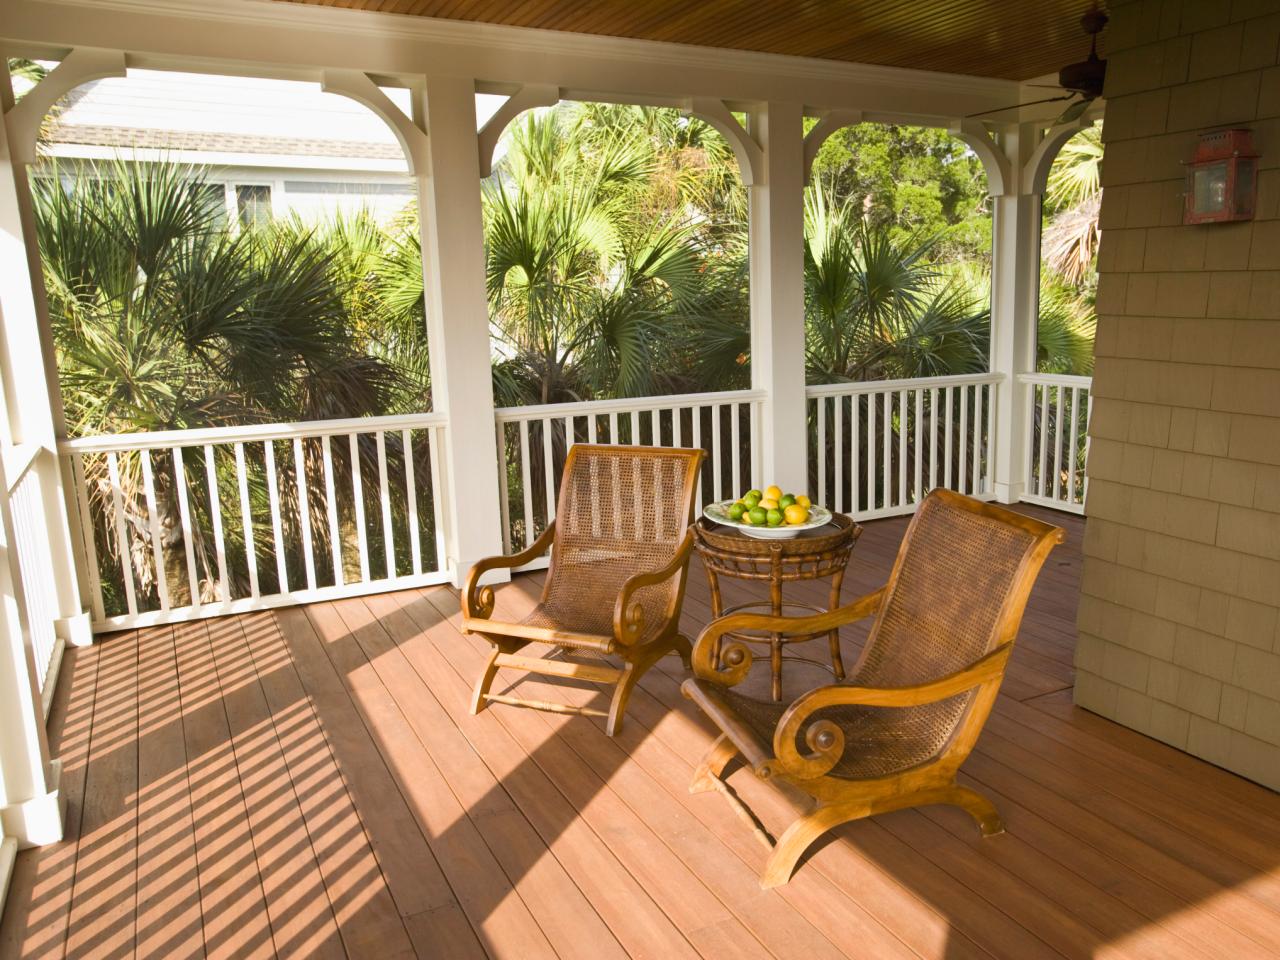 Porch Posts And Columns Hgtv,Modern Country House Designs Ireland